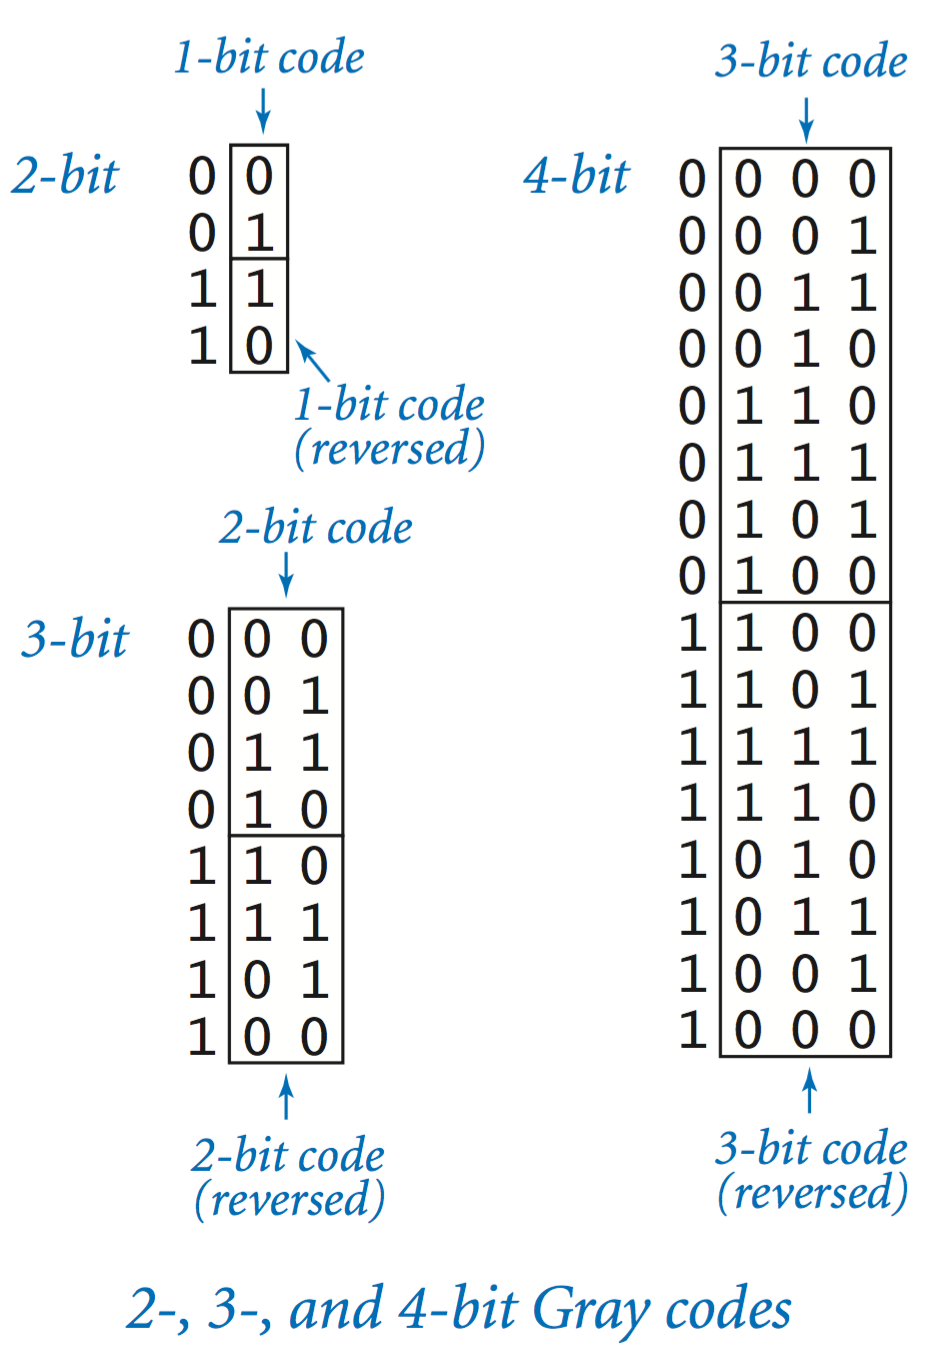 2-, 3-, and 4-bit Gray codes